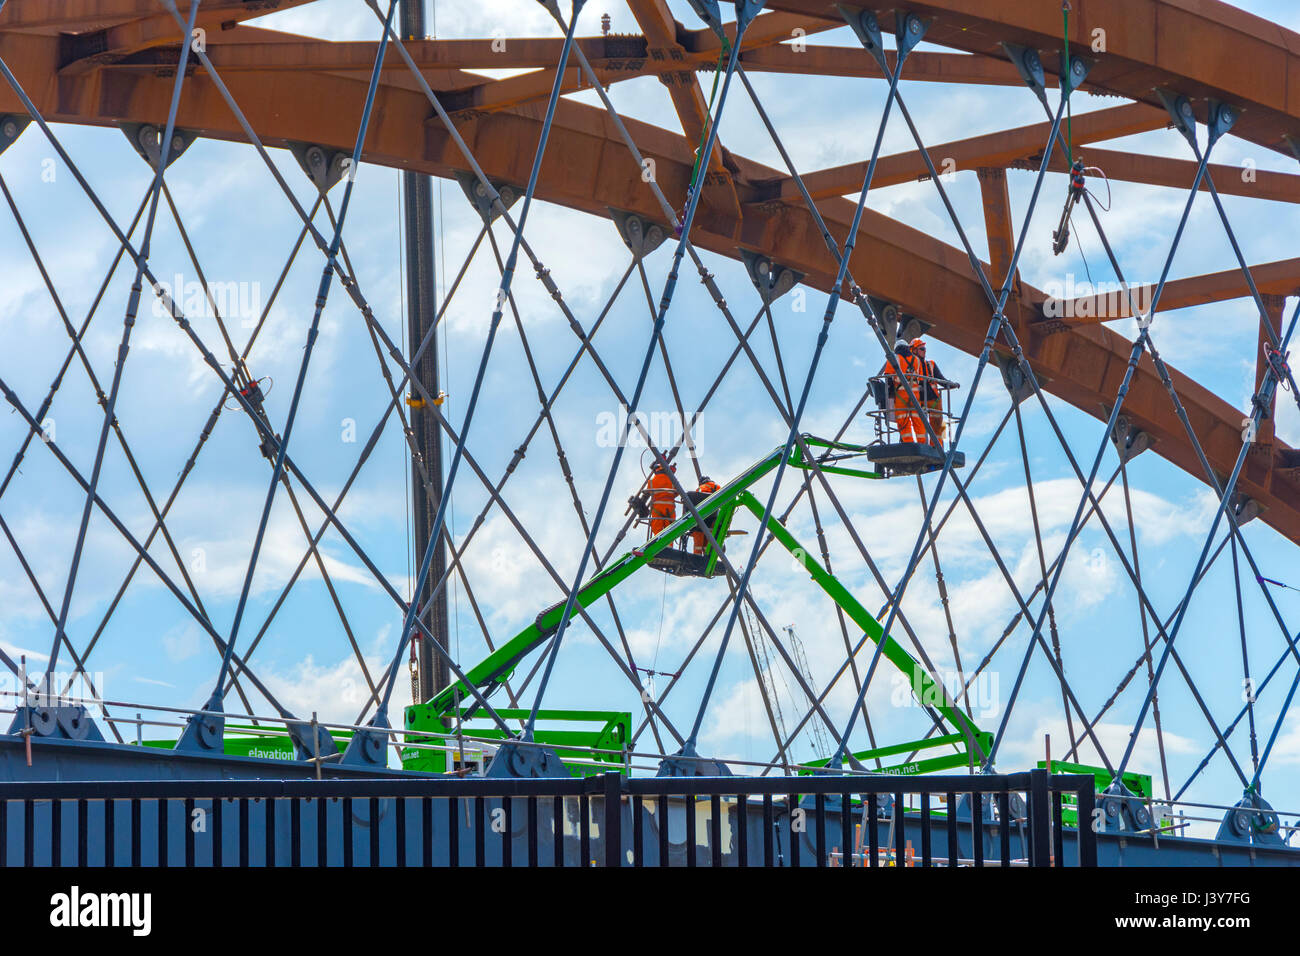 Workmen on access platforms on the new rail bridge under construction over the river Irwell, Ordsall Chord rail link project, Salford, Manchester, UK Stock Photo